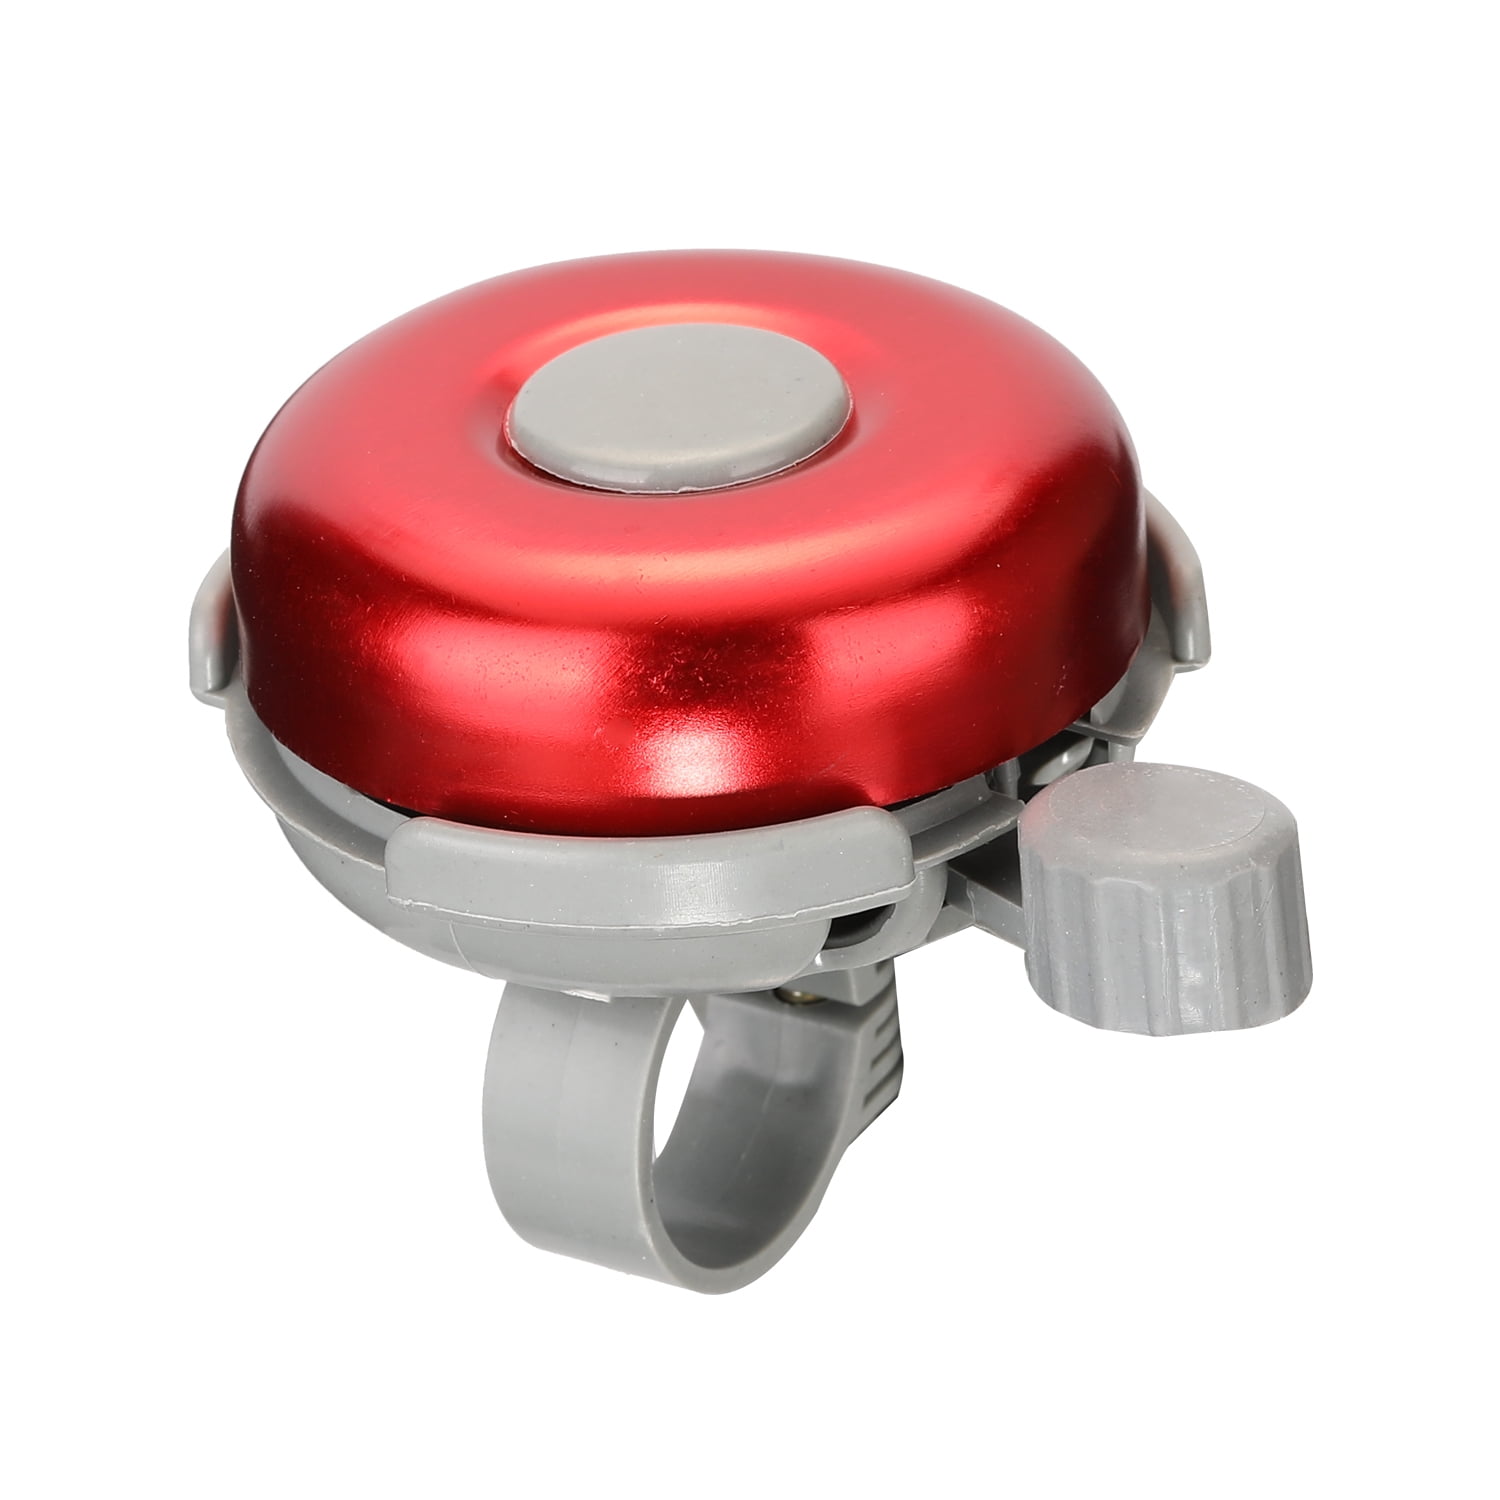 Details about   Mini Bicycle Bike Bell Cycling Handlebar Mount Horn Ring High Quality,Safety New 